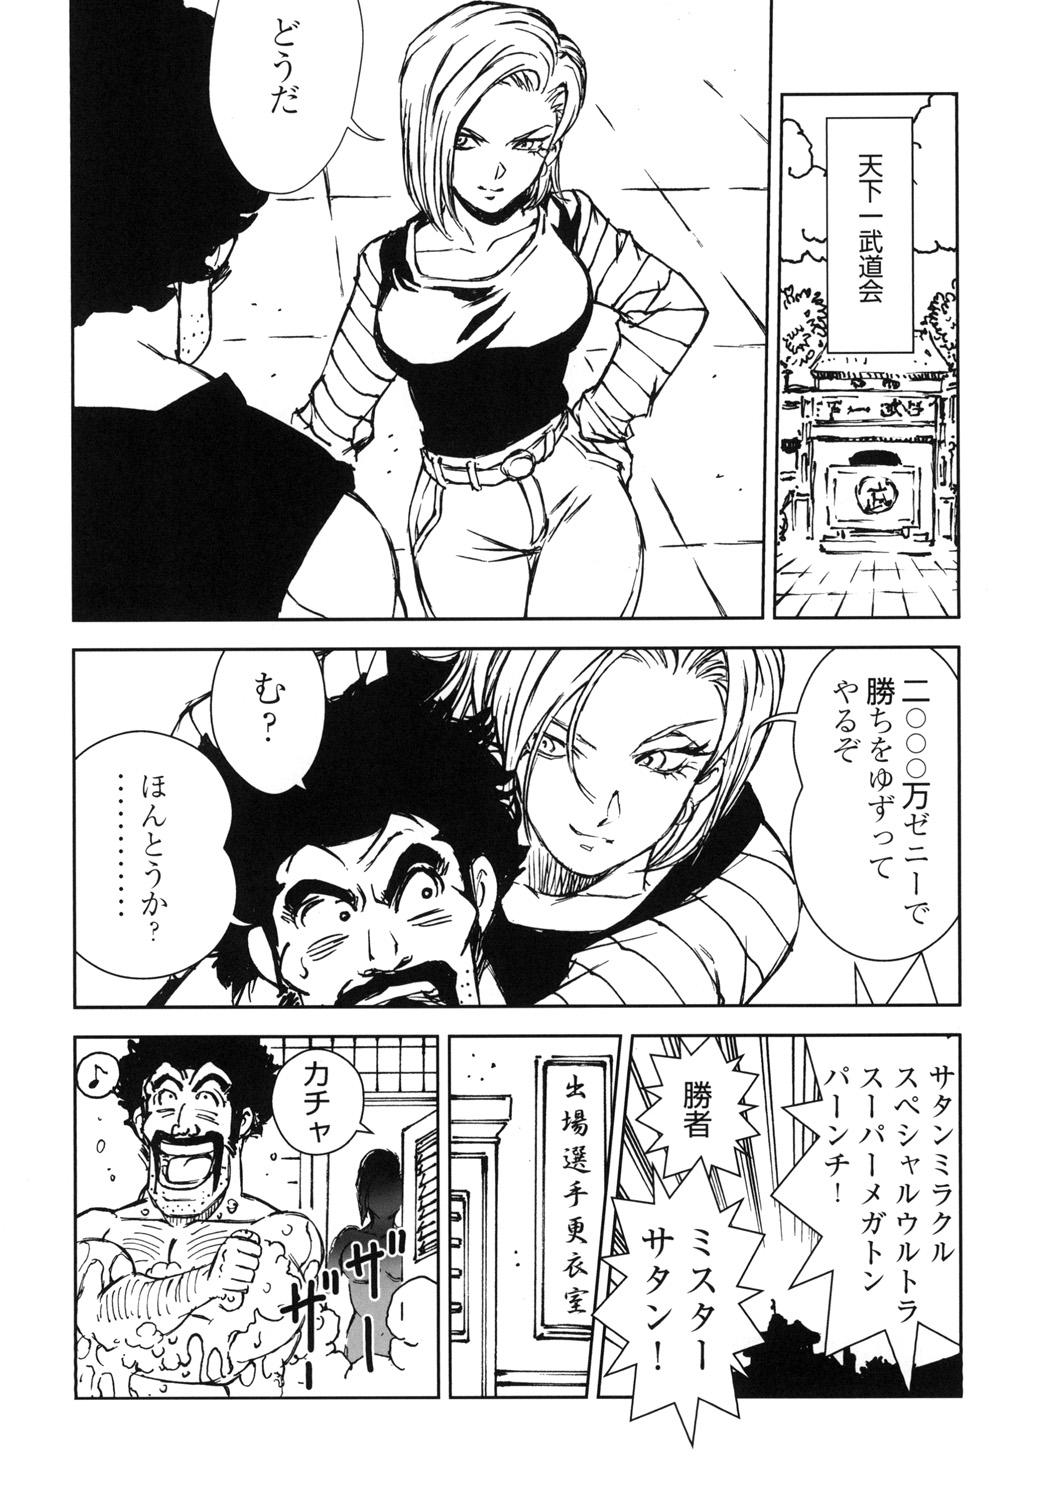 Cum Eating 18+ - Dragon ball z Muscular - Page 5